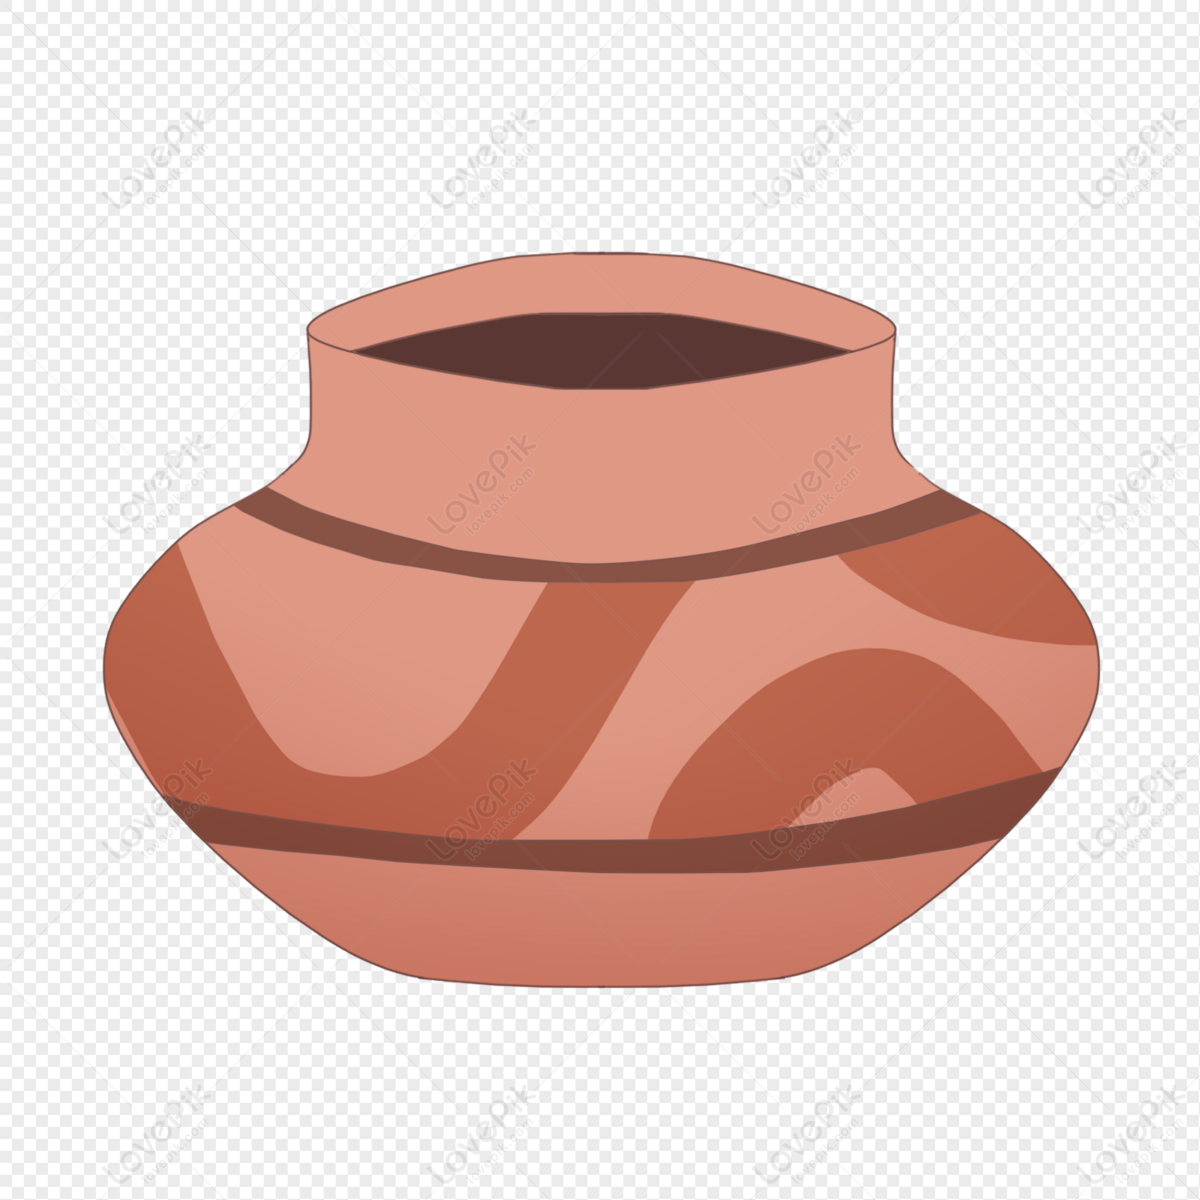 Hand Drawn Cartoon World Museum Day Red Clay Pot PNG Hd Transparent Image  And Clipart Image For Free Download - Lovepik | 401265254